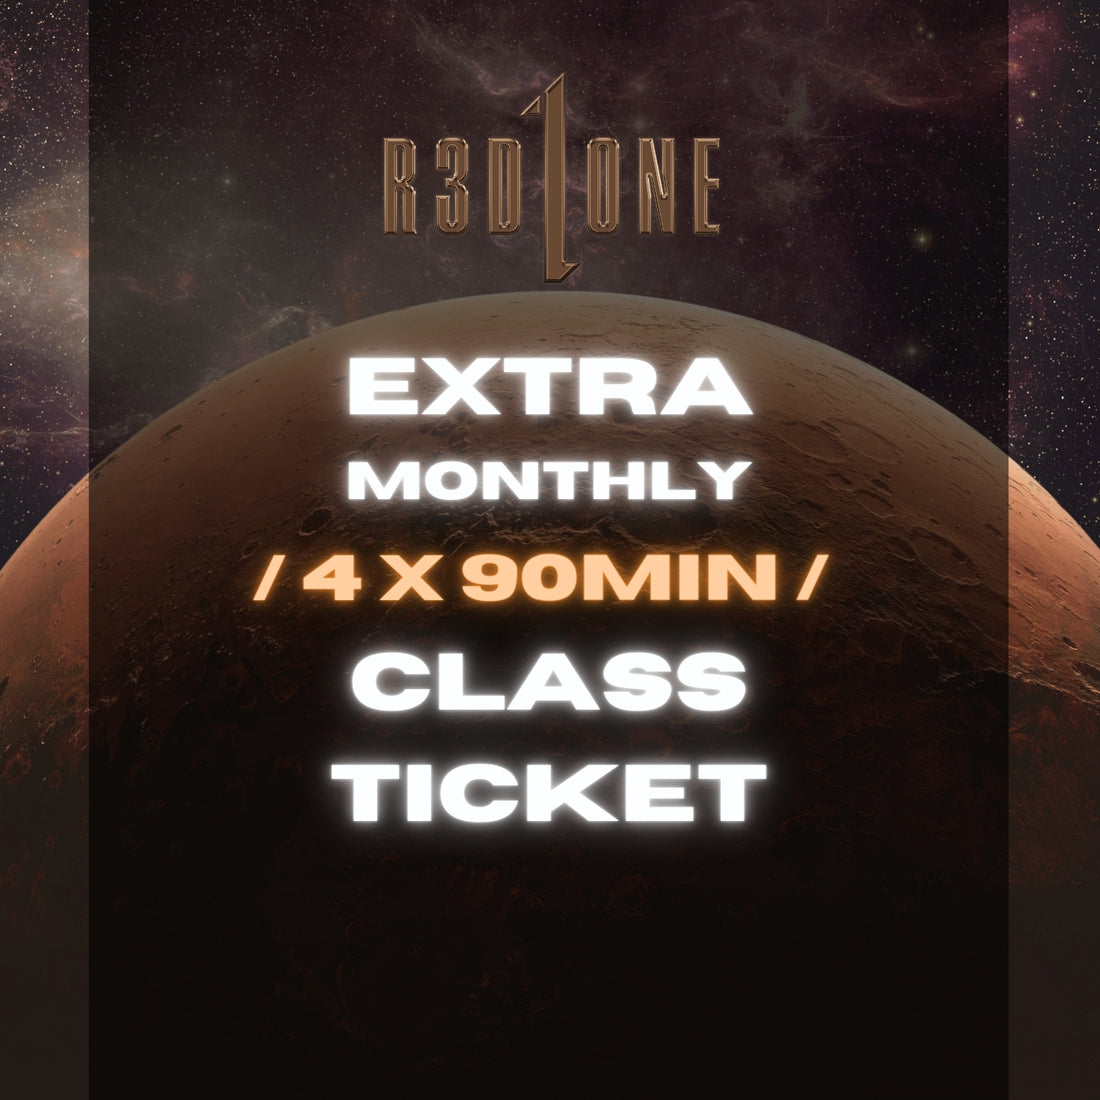 EXTRA MONTHLY /4x90 MIN/ CLASS TICKET